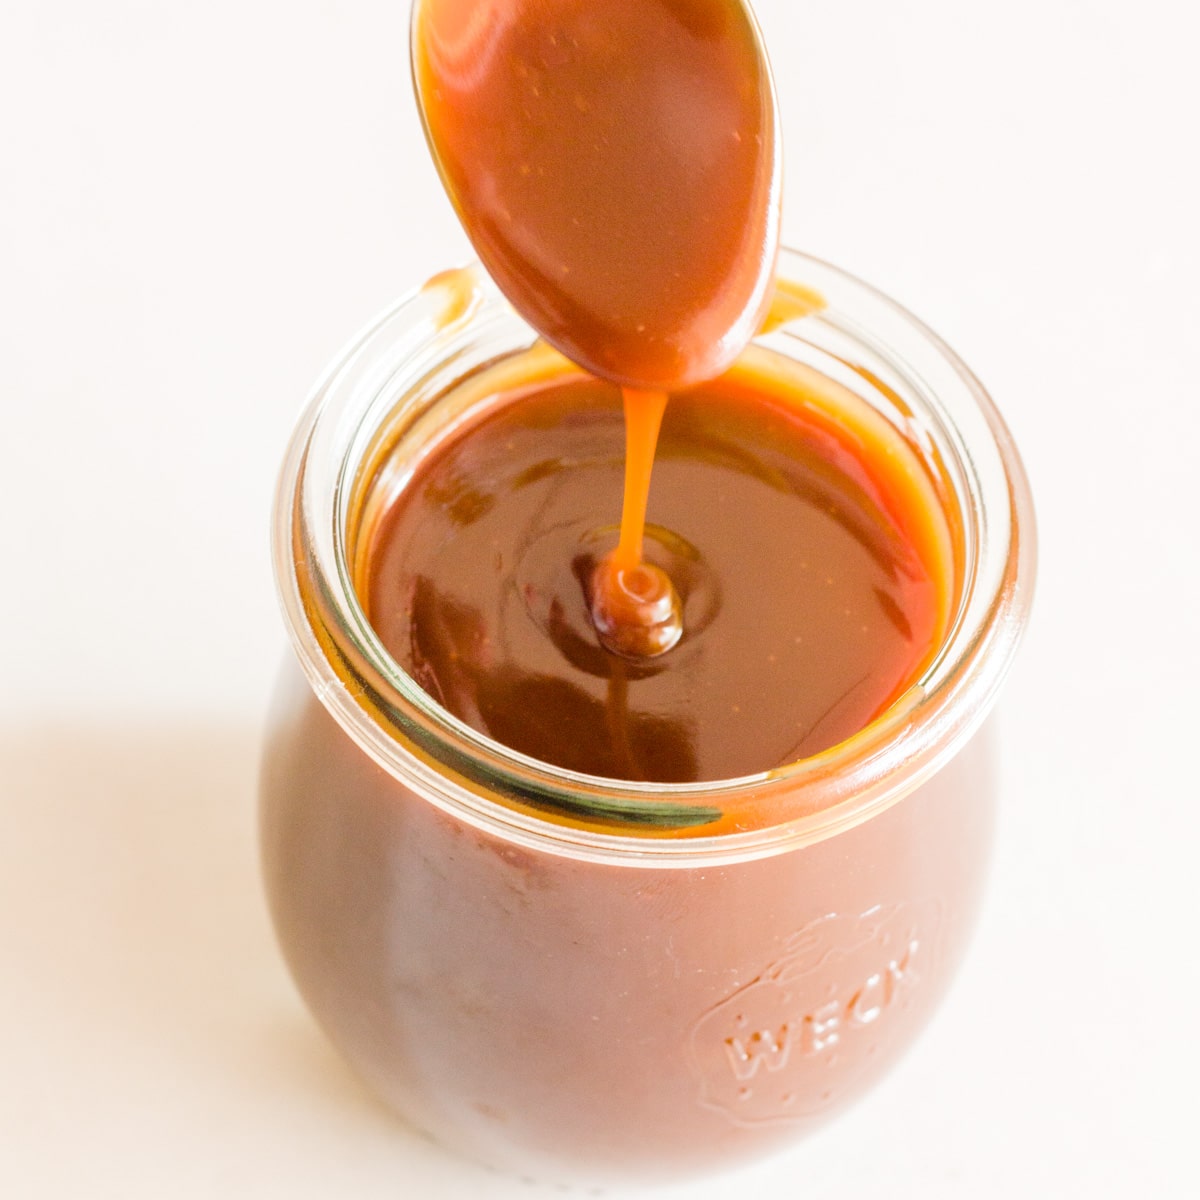 salted caramel sauce falling off a spoon into a jar